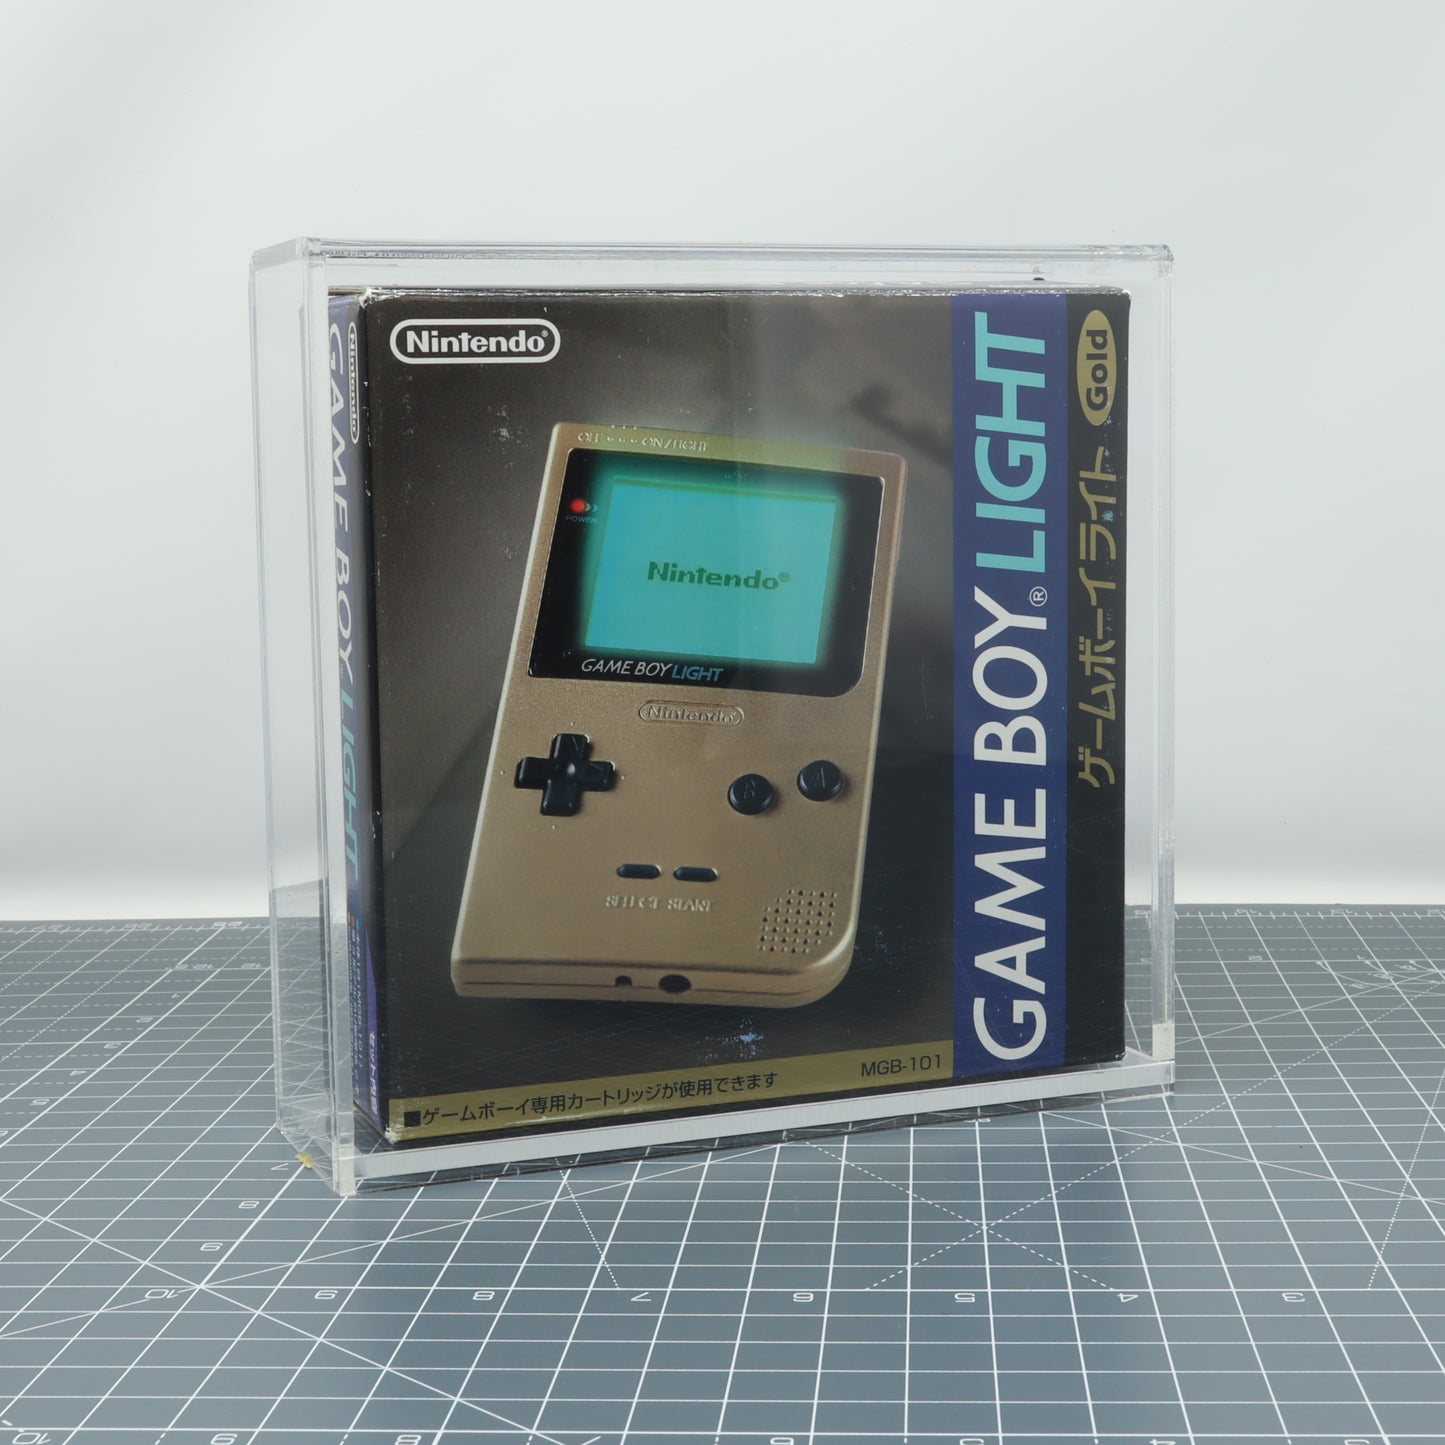 Game Boy Light Boxed JPN Console - Display Capsule